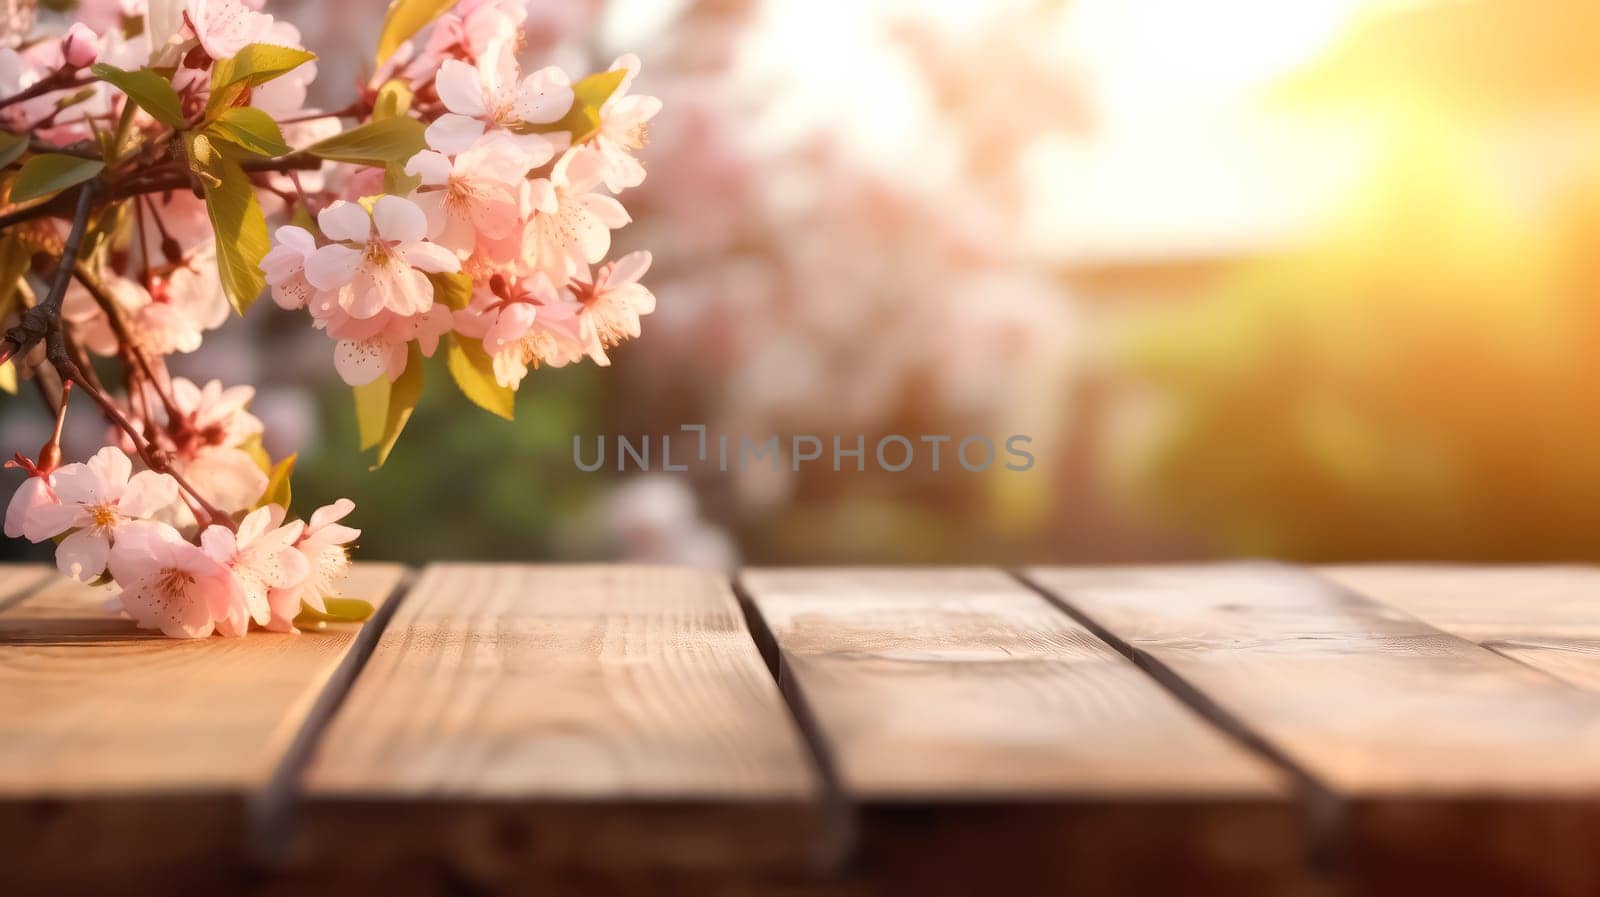 A rustic charm, an empty wooden table set in a Sakura flower park, surrounded by the soft bokeh of a garden. Perfect for showcasing outdoor themed products.